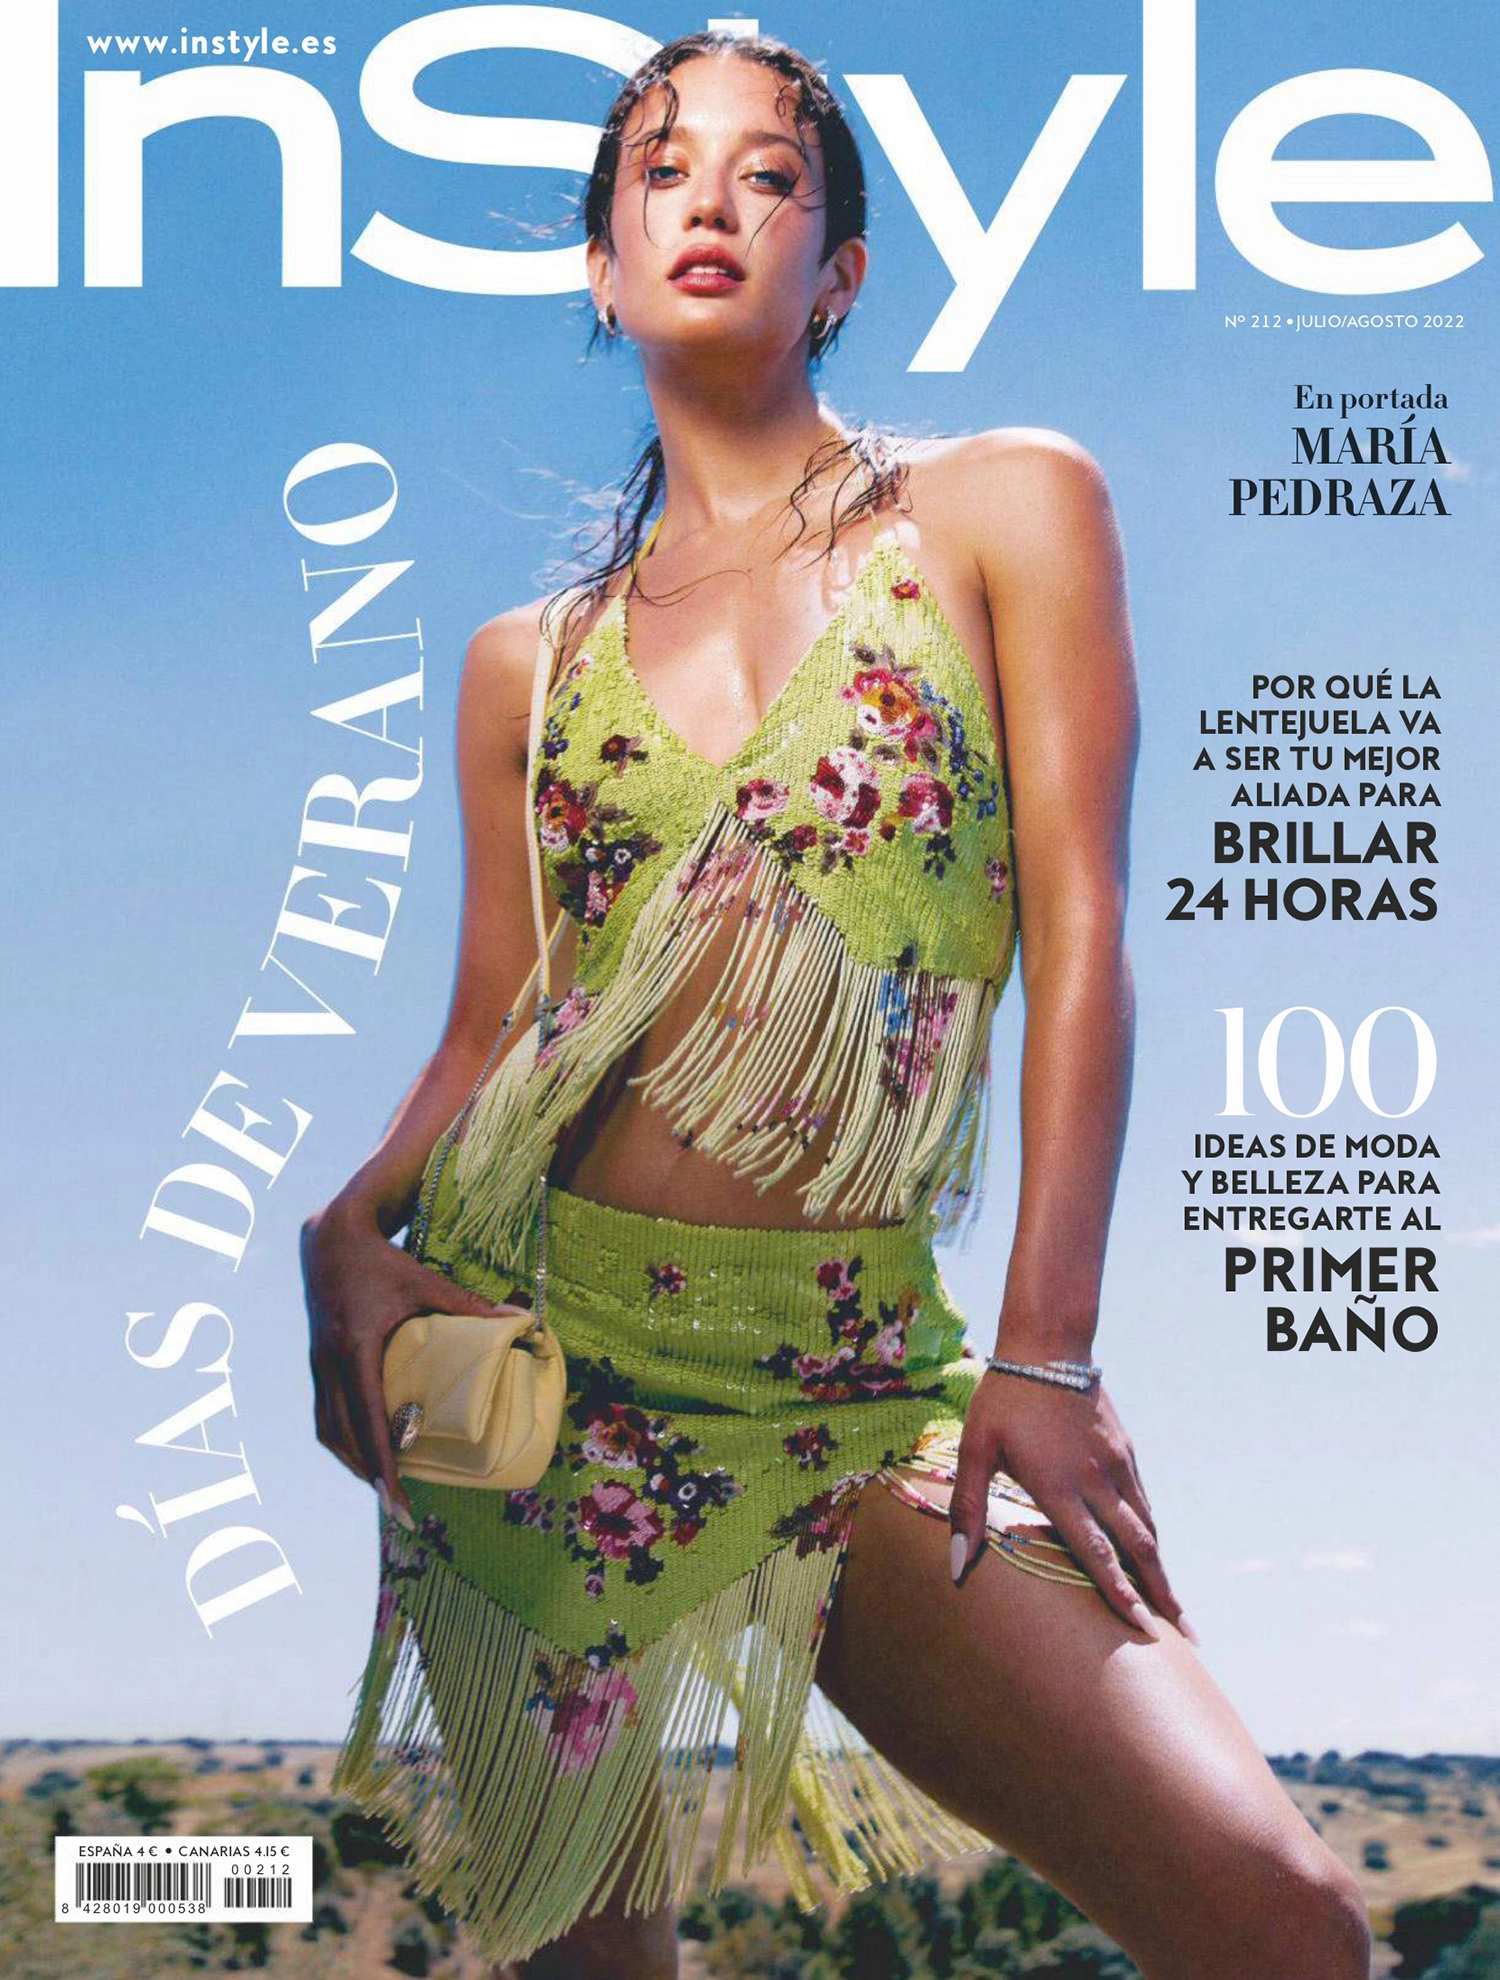 María Pedraza covers InStyle Spain July August 2022 by Javier Biosca